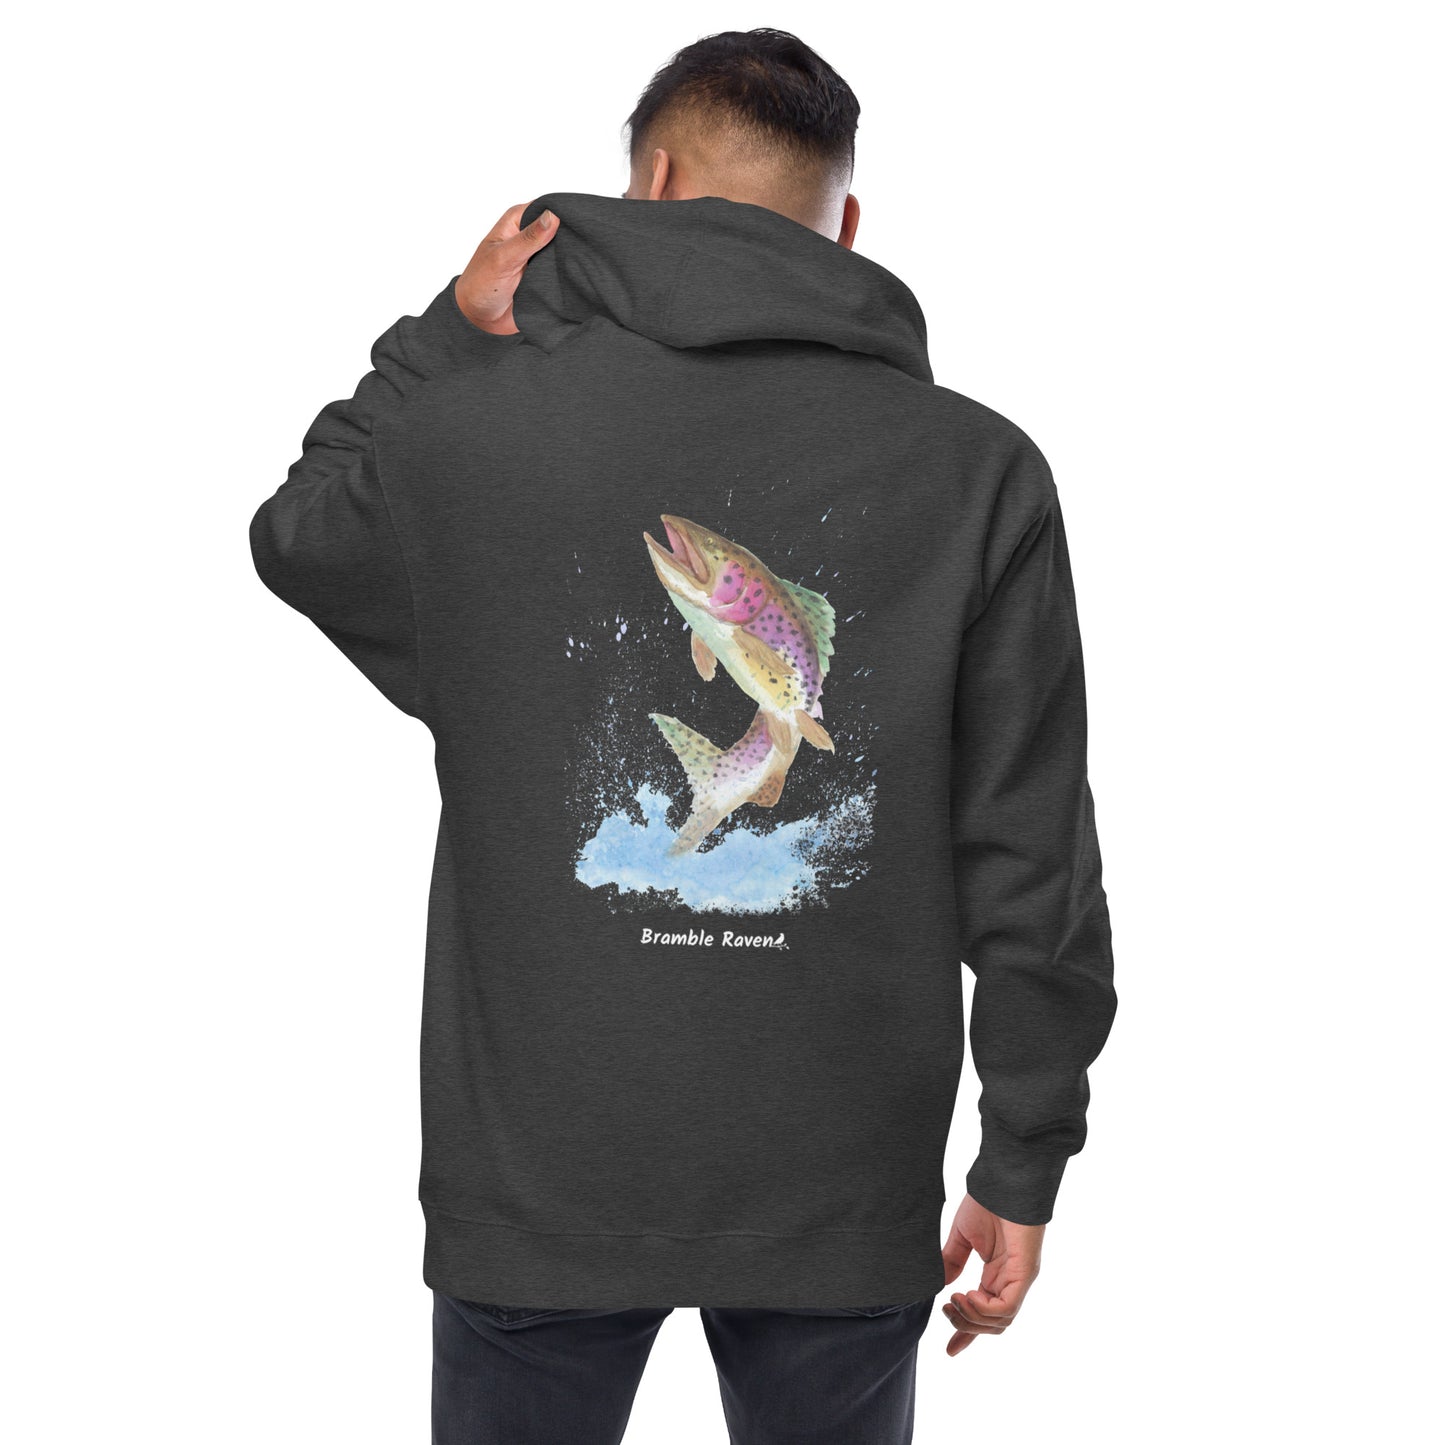 Unisex charcoal heather grey colored fleece-lined zip-up hoodie. Features original watercolor painting of a rainbow trout leaping from the water on the back of the hoodie. Shown on a male model.